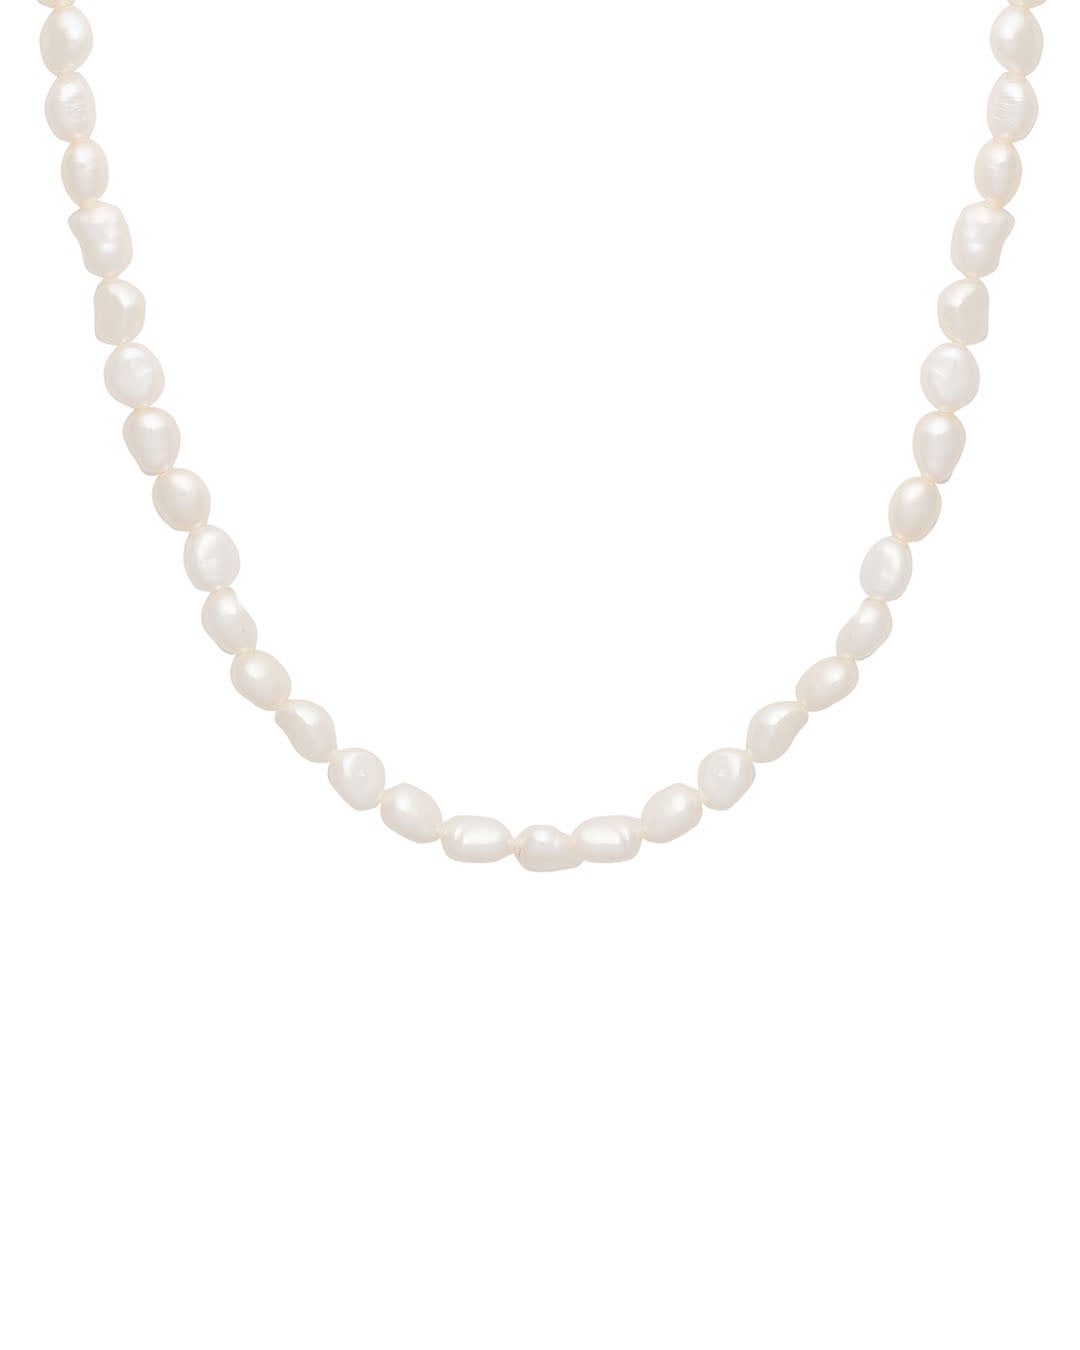 Pearl Purienne Neckalce Necklaces by YCL Jewels - Prae Store